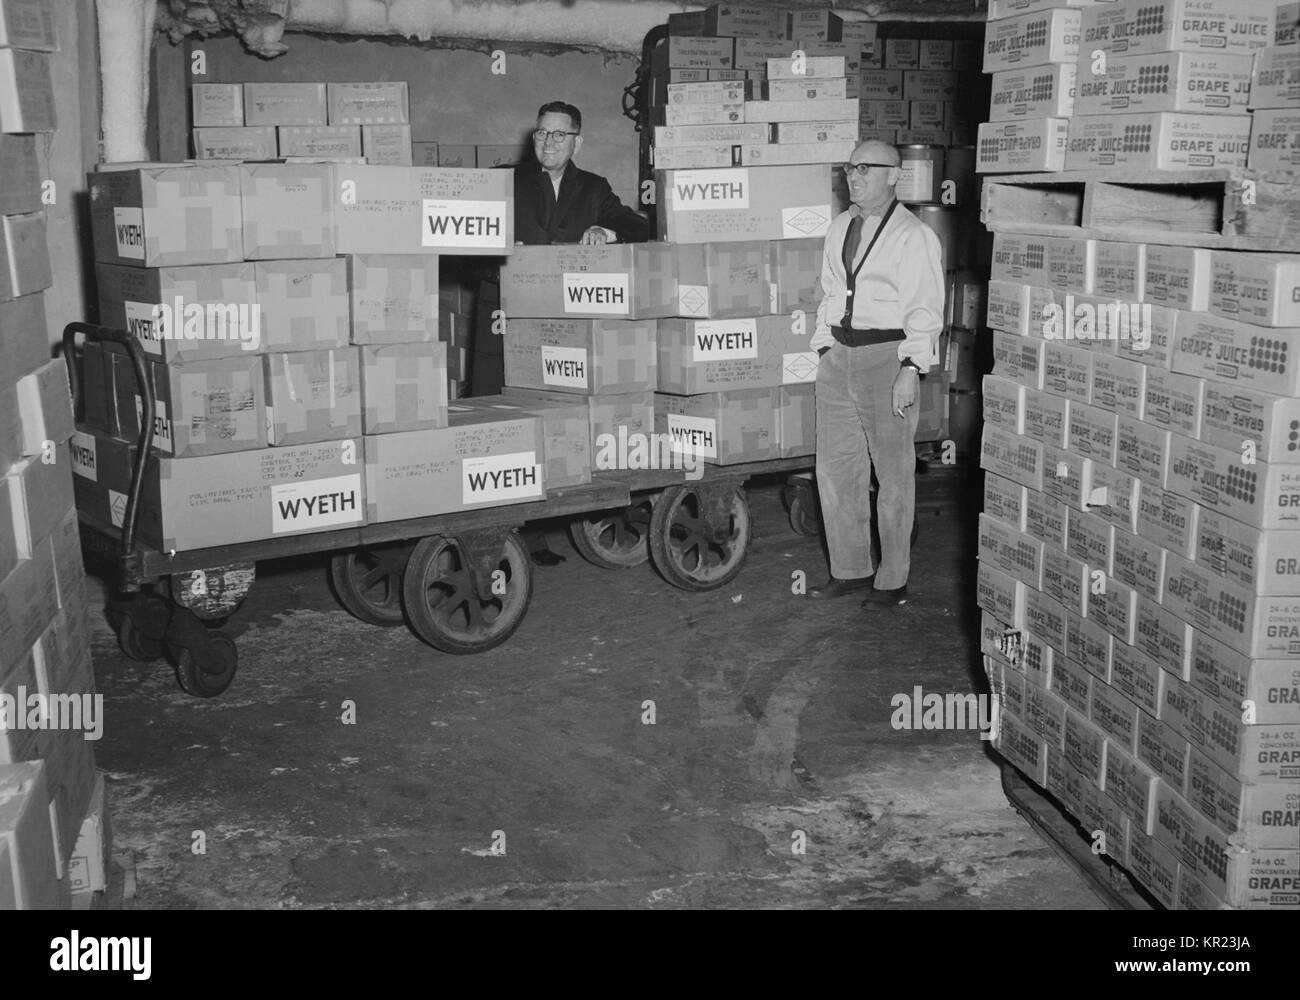 Two workers stand beside a cart loaded with boxes containing poliovirus vaccine, 1963. In the early 1950's, there were more than 20, 000 cases of polio each year. After polio vaccination began in 1955, cases dropped significantly. By 1960, the number of cases dropped to about 3, 000, and by 1979 there were only about 10. Image courtesy CDC/Mr. Stafford Smith. Stock Photo